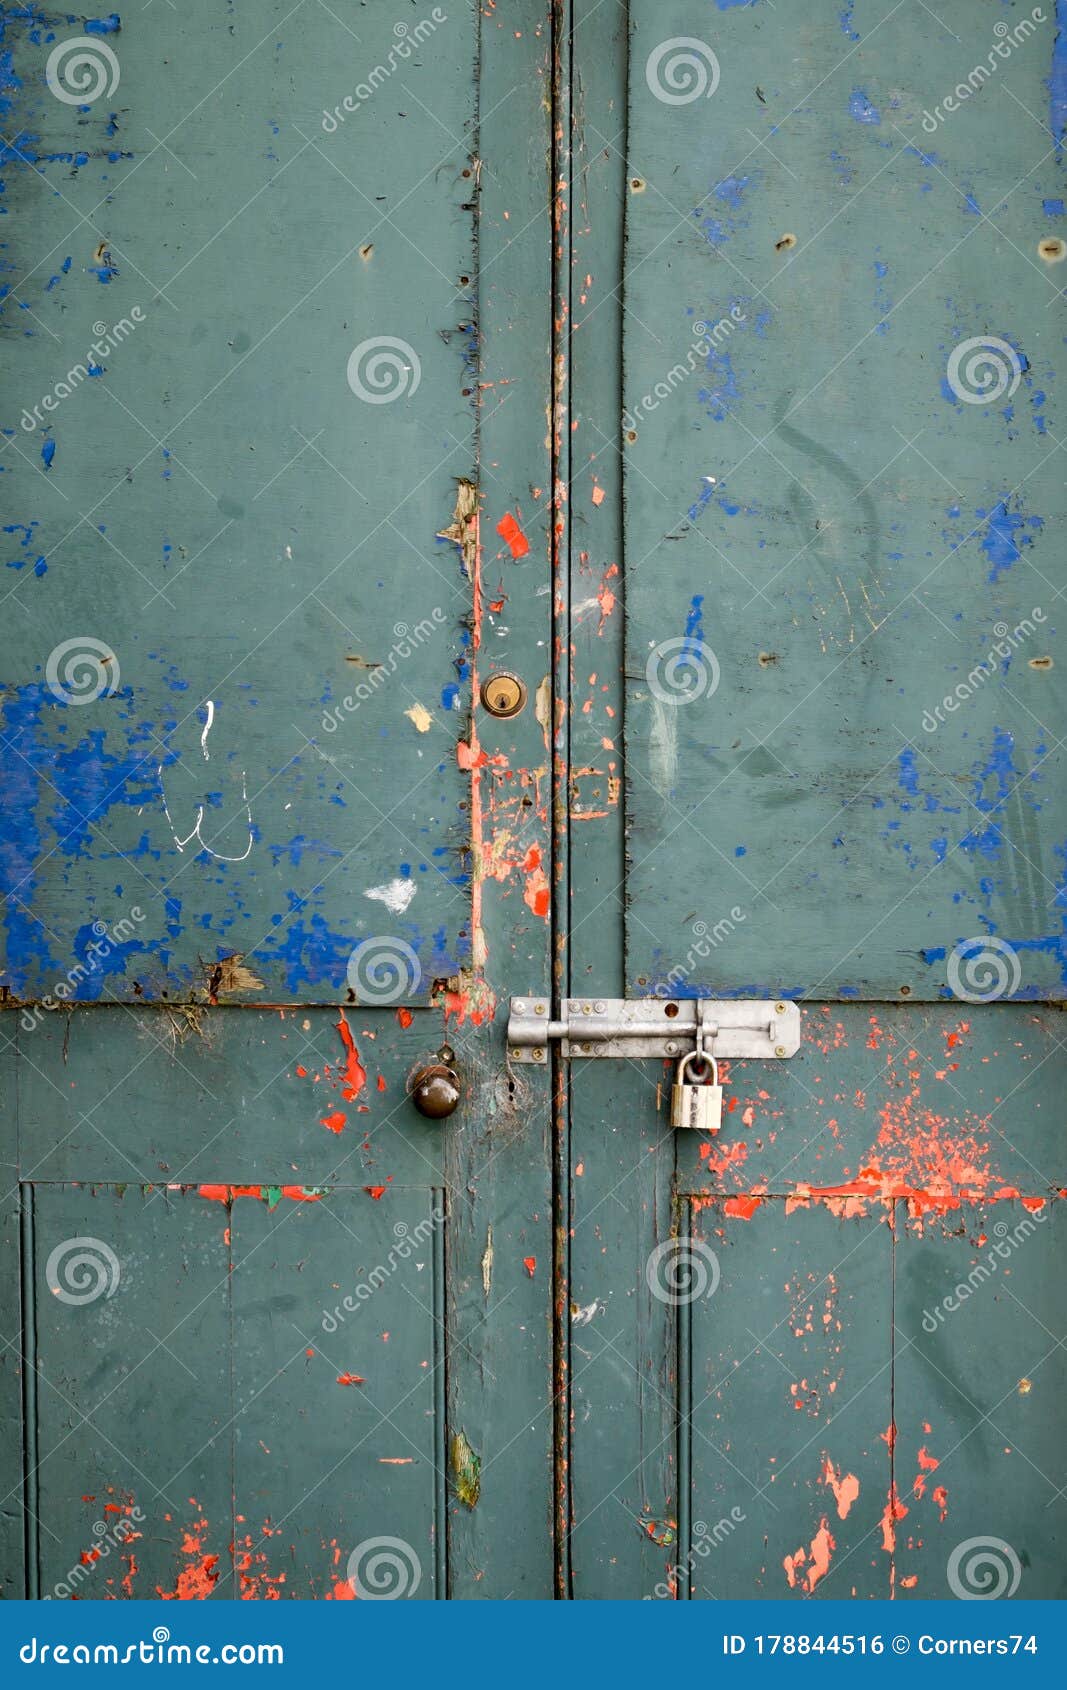 Paint Flaking Off a Disused Locked Up Door with Padlock and Grungey ...